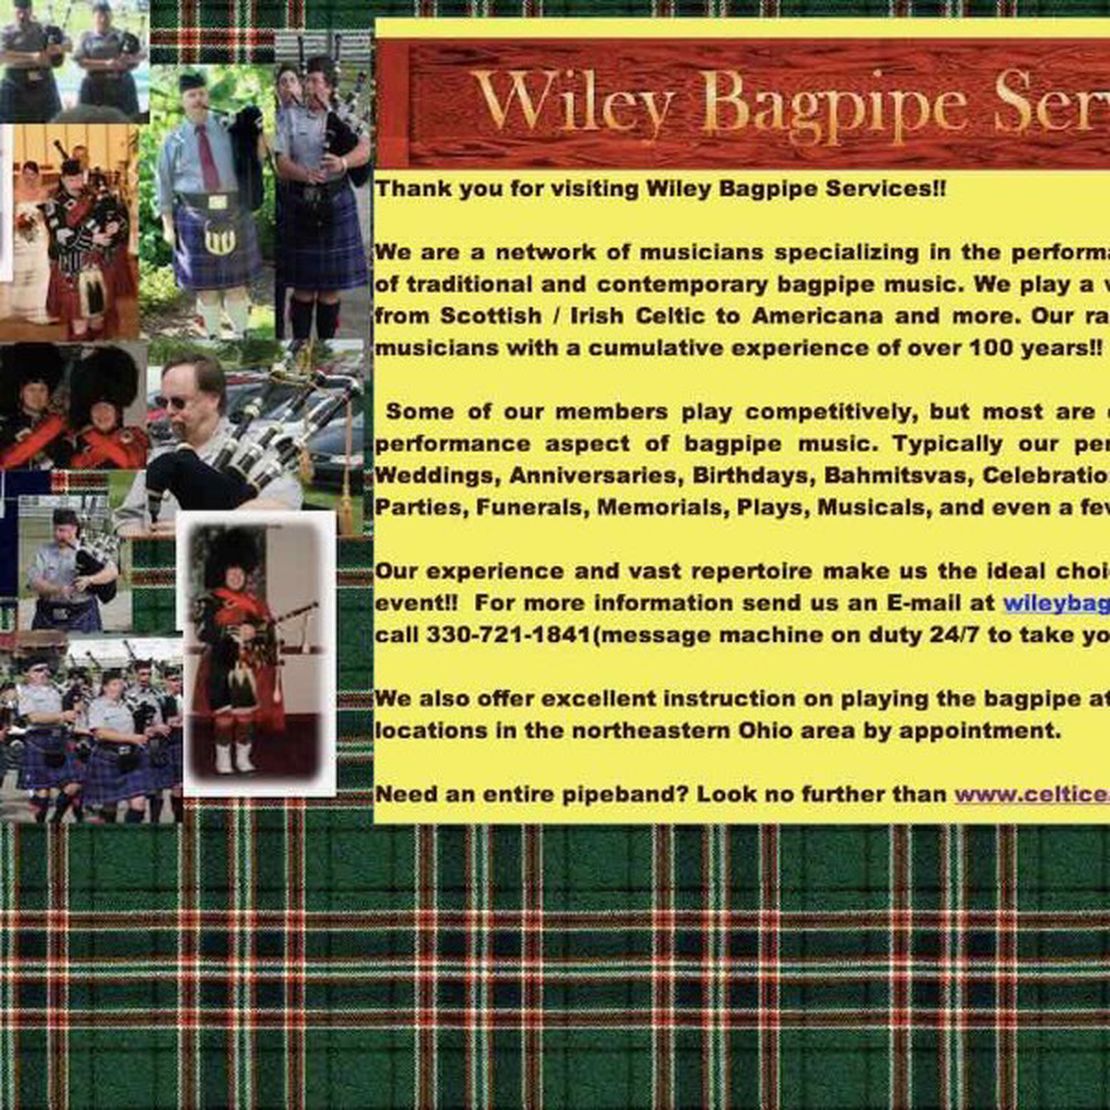 wiley bagpipe services